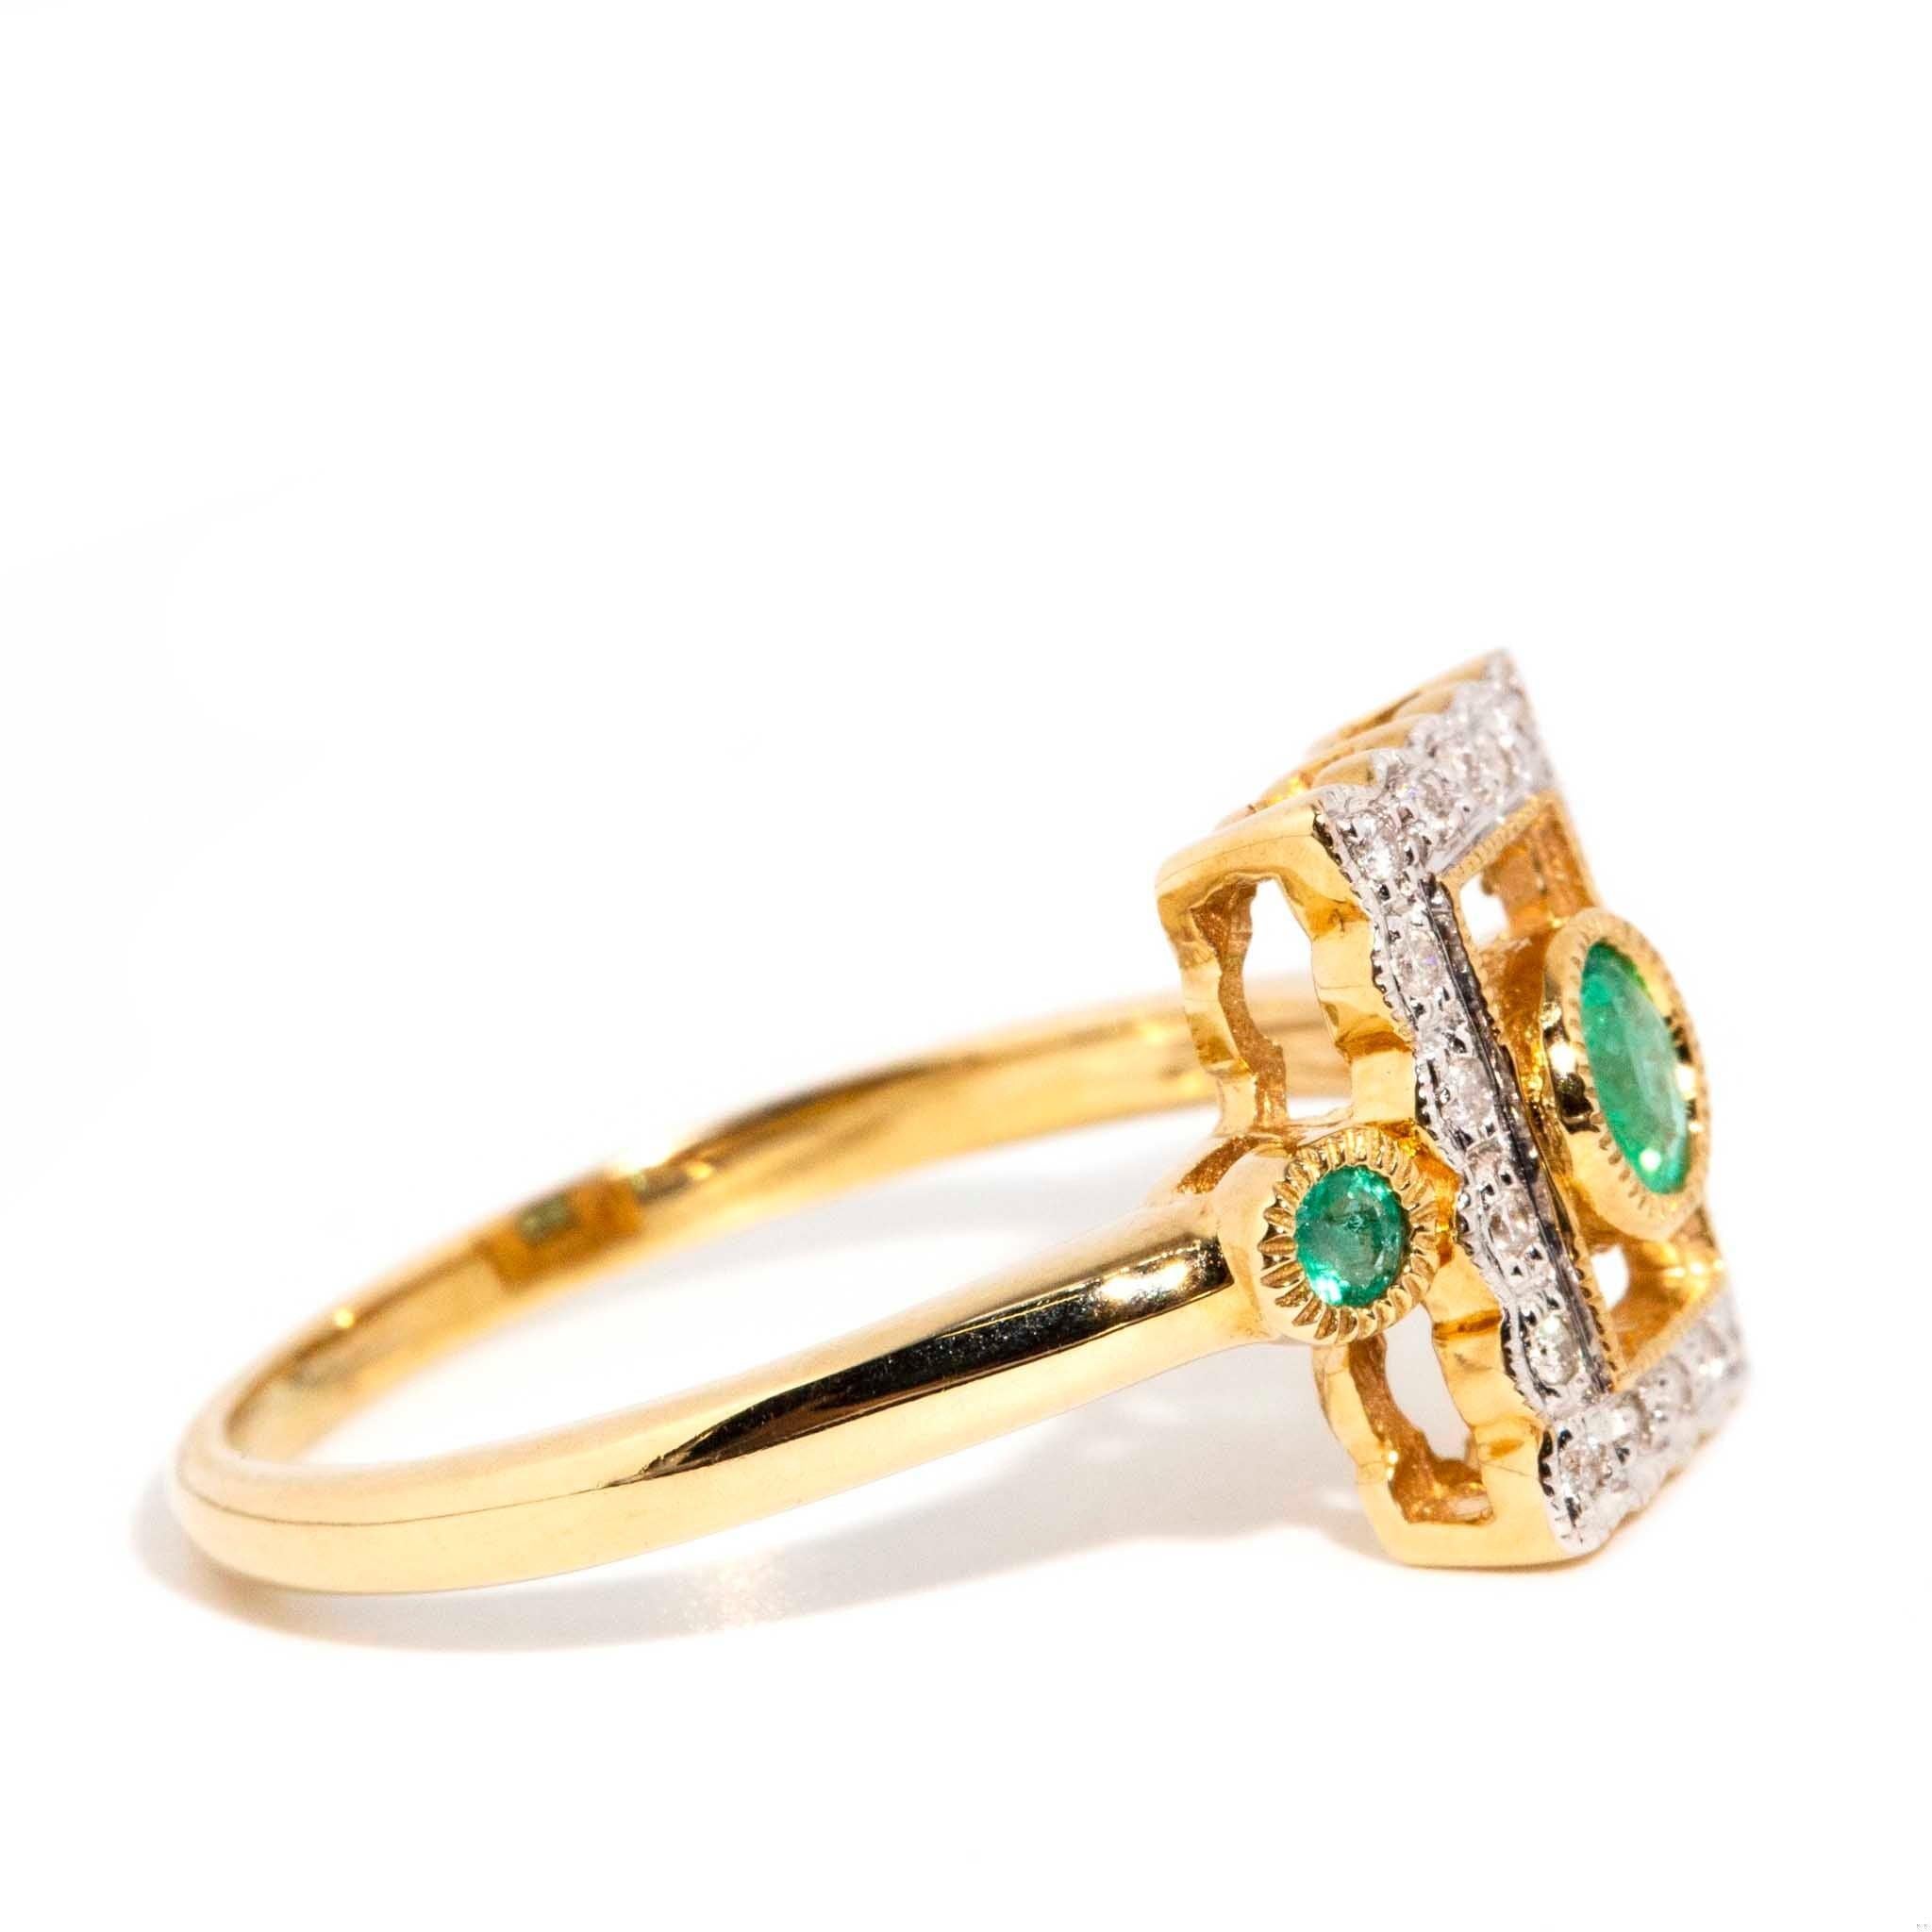 Vintage Inspired Bright Green Emerald & Diamond Ring 9 Carat Yellow Gold For Sale 1